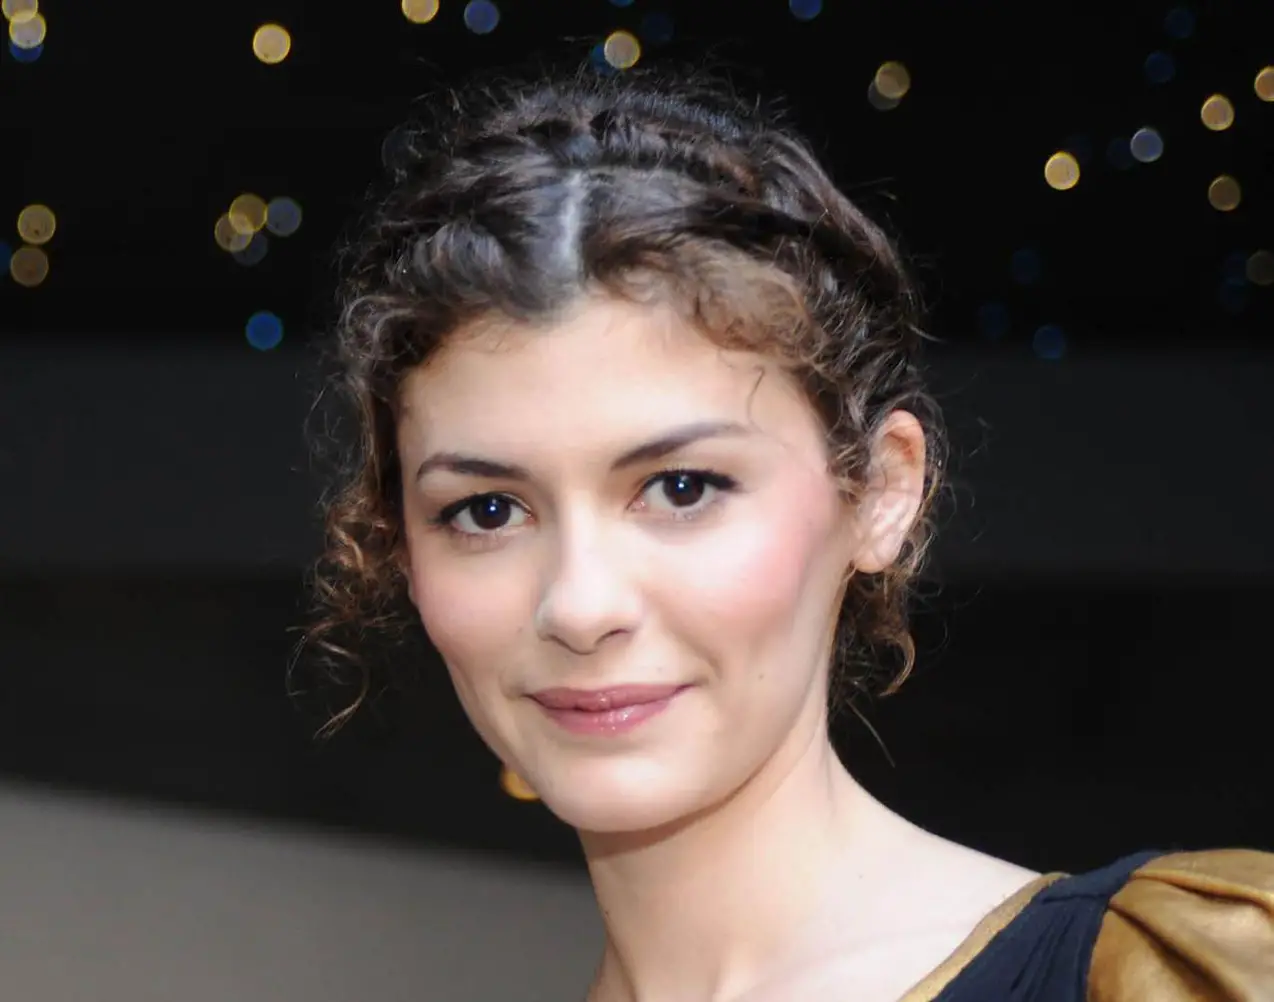 Audrey Tautou - Height, Weight, Bra Size, Measurements & Bio